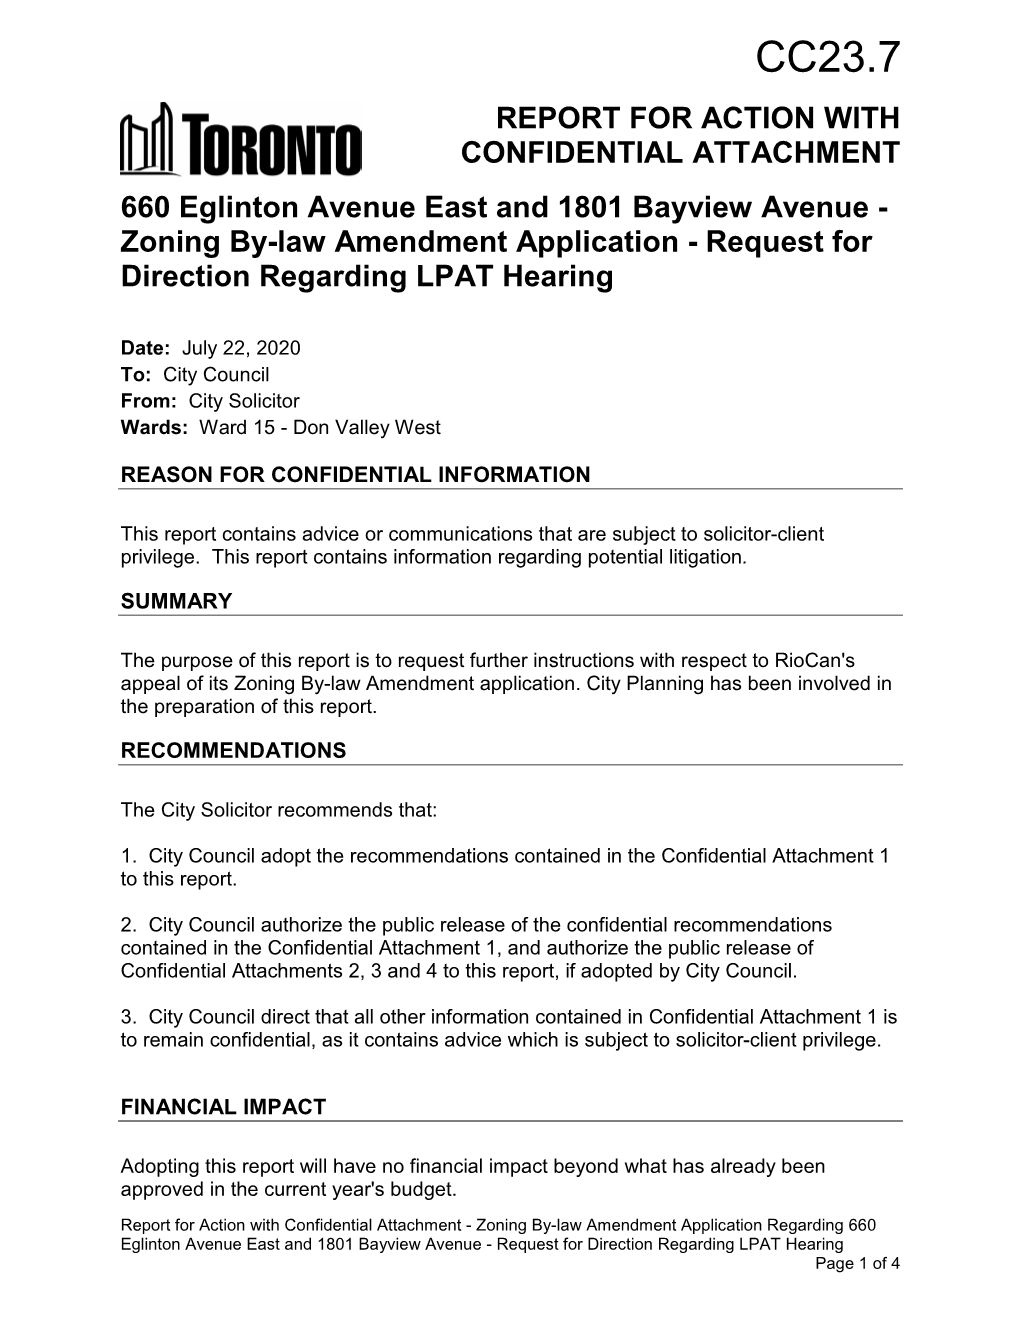 660 Eglinton Avenue East and 1801 Bayview Avenue - Zoning By-Law Amendment Application - Request for Direction Regarding LPAT Hearing